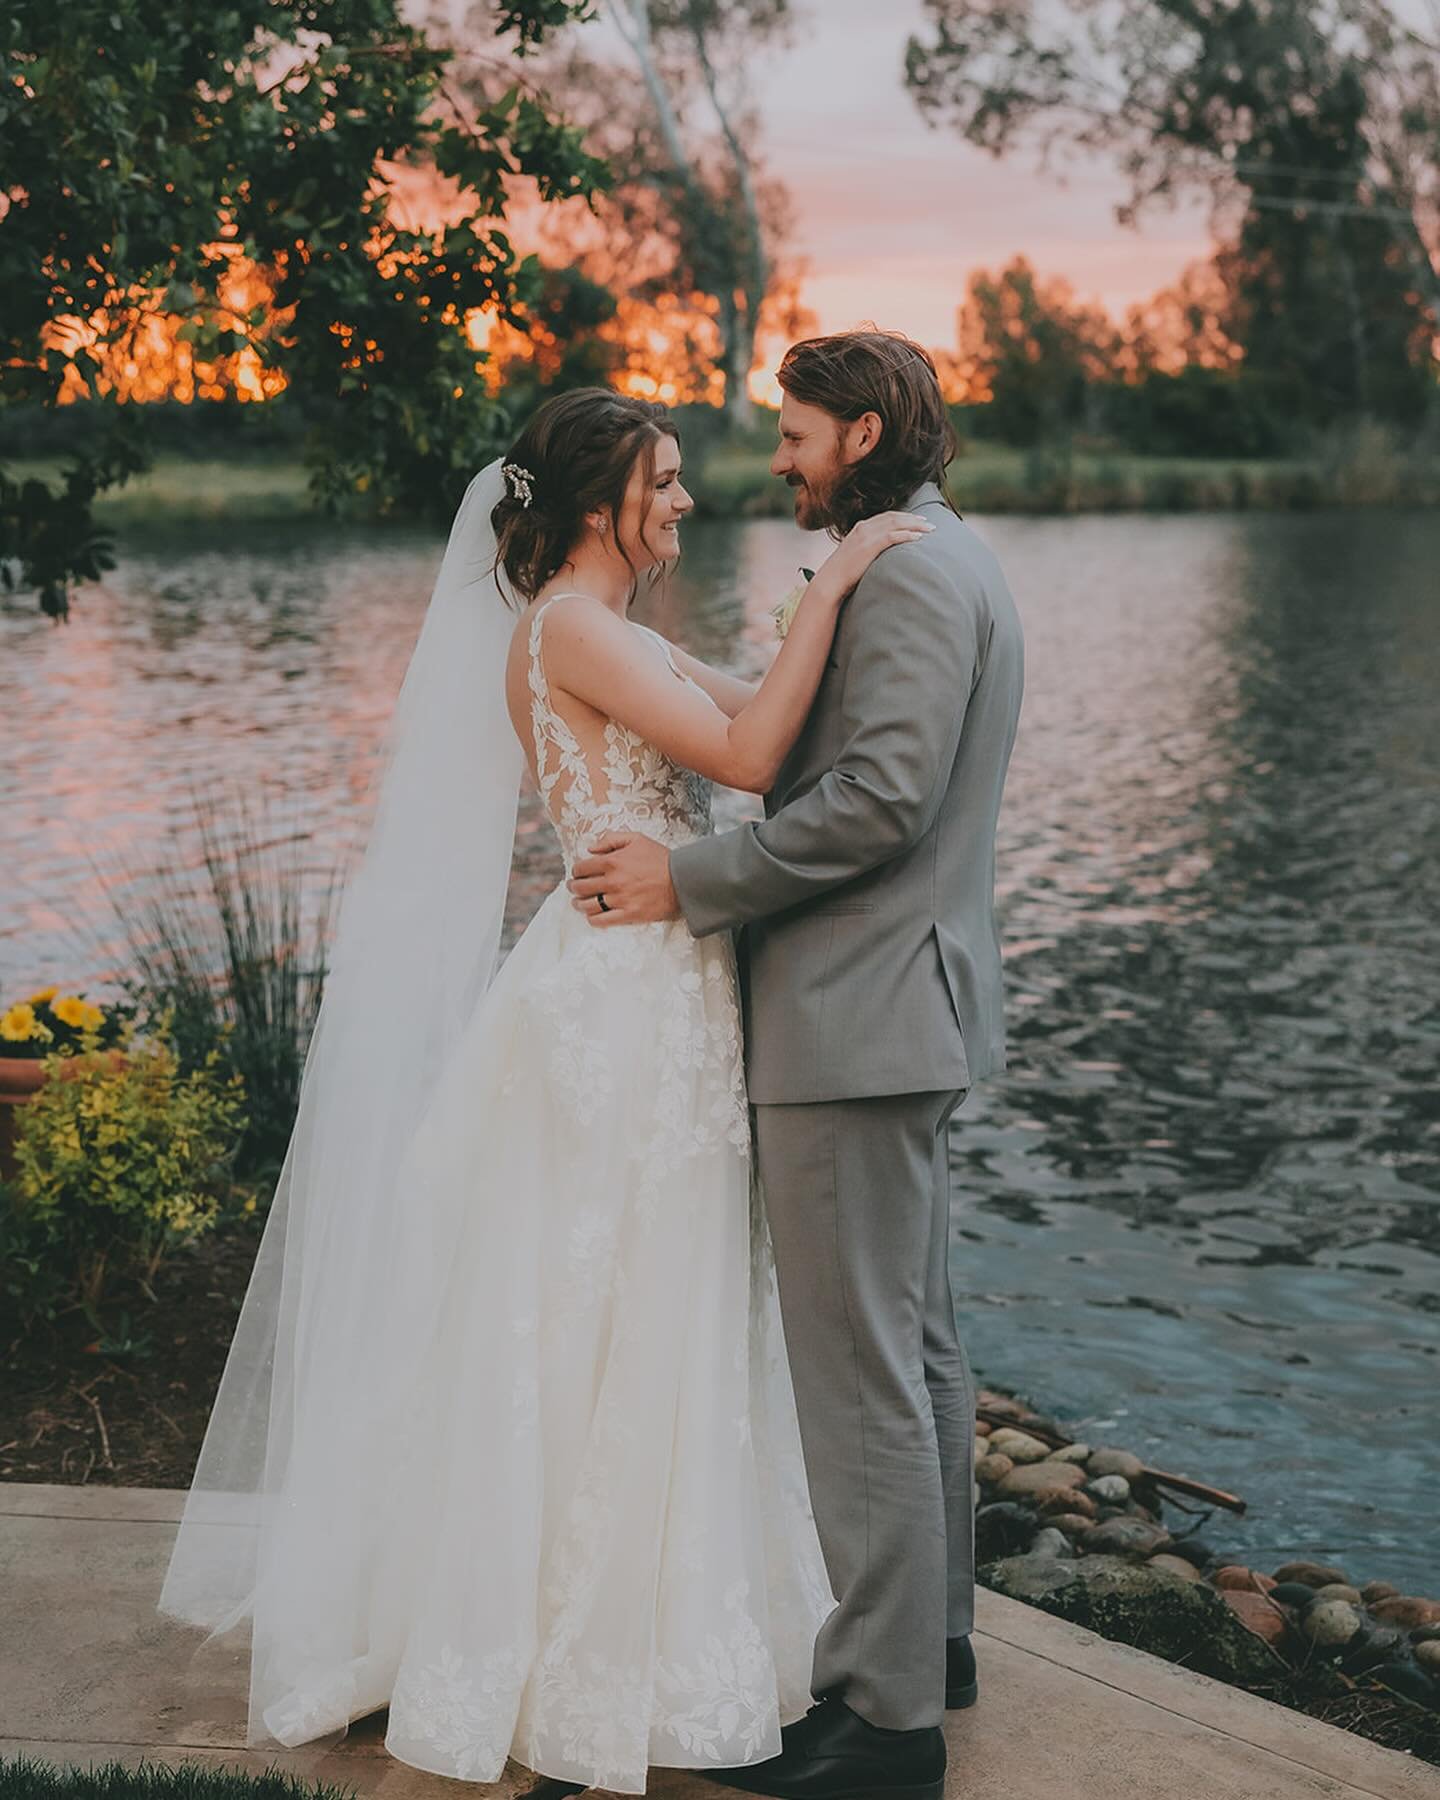 It&rsquo;s time to start planning your dream wedding! 💕 The Clausen Gallery is now open for bookings for 2025 weddings. Let our experienced team capture every precious moment of your special day. Plus, we have a few spots left for 2024 weddings. Don